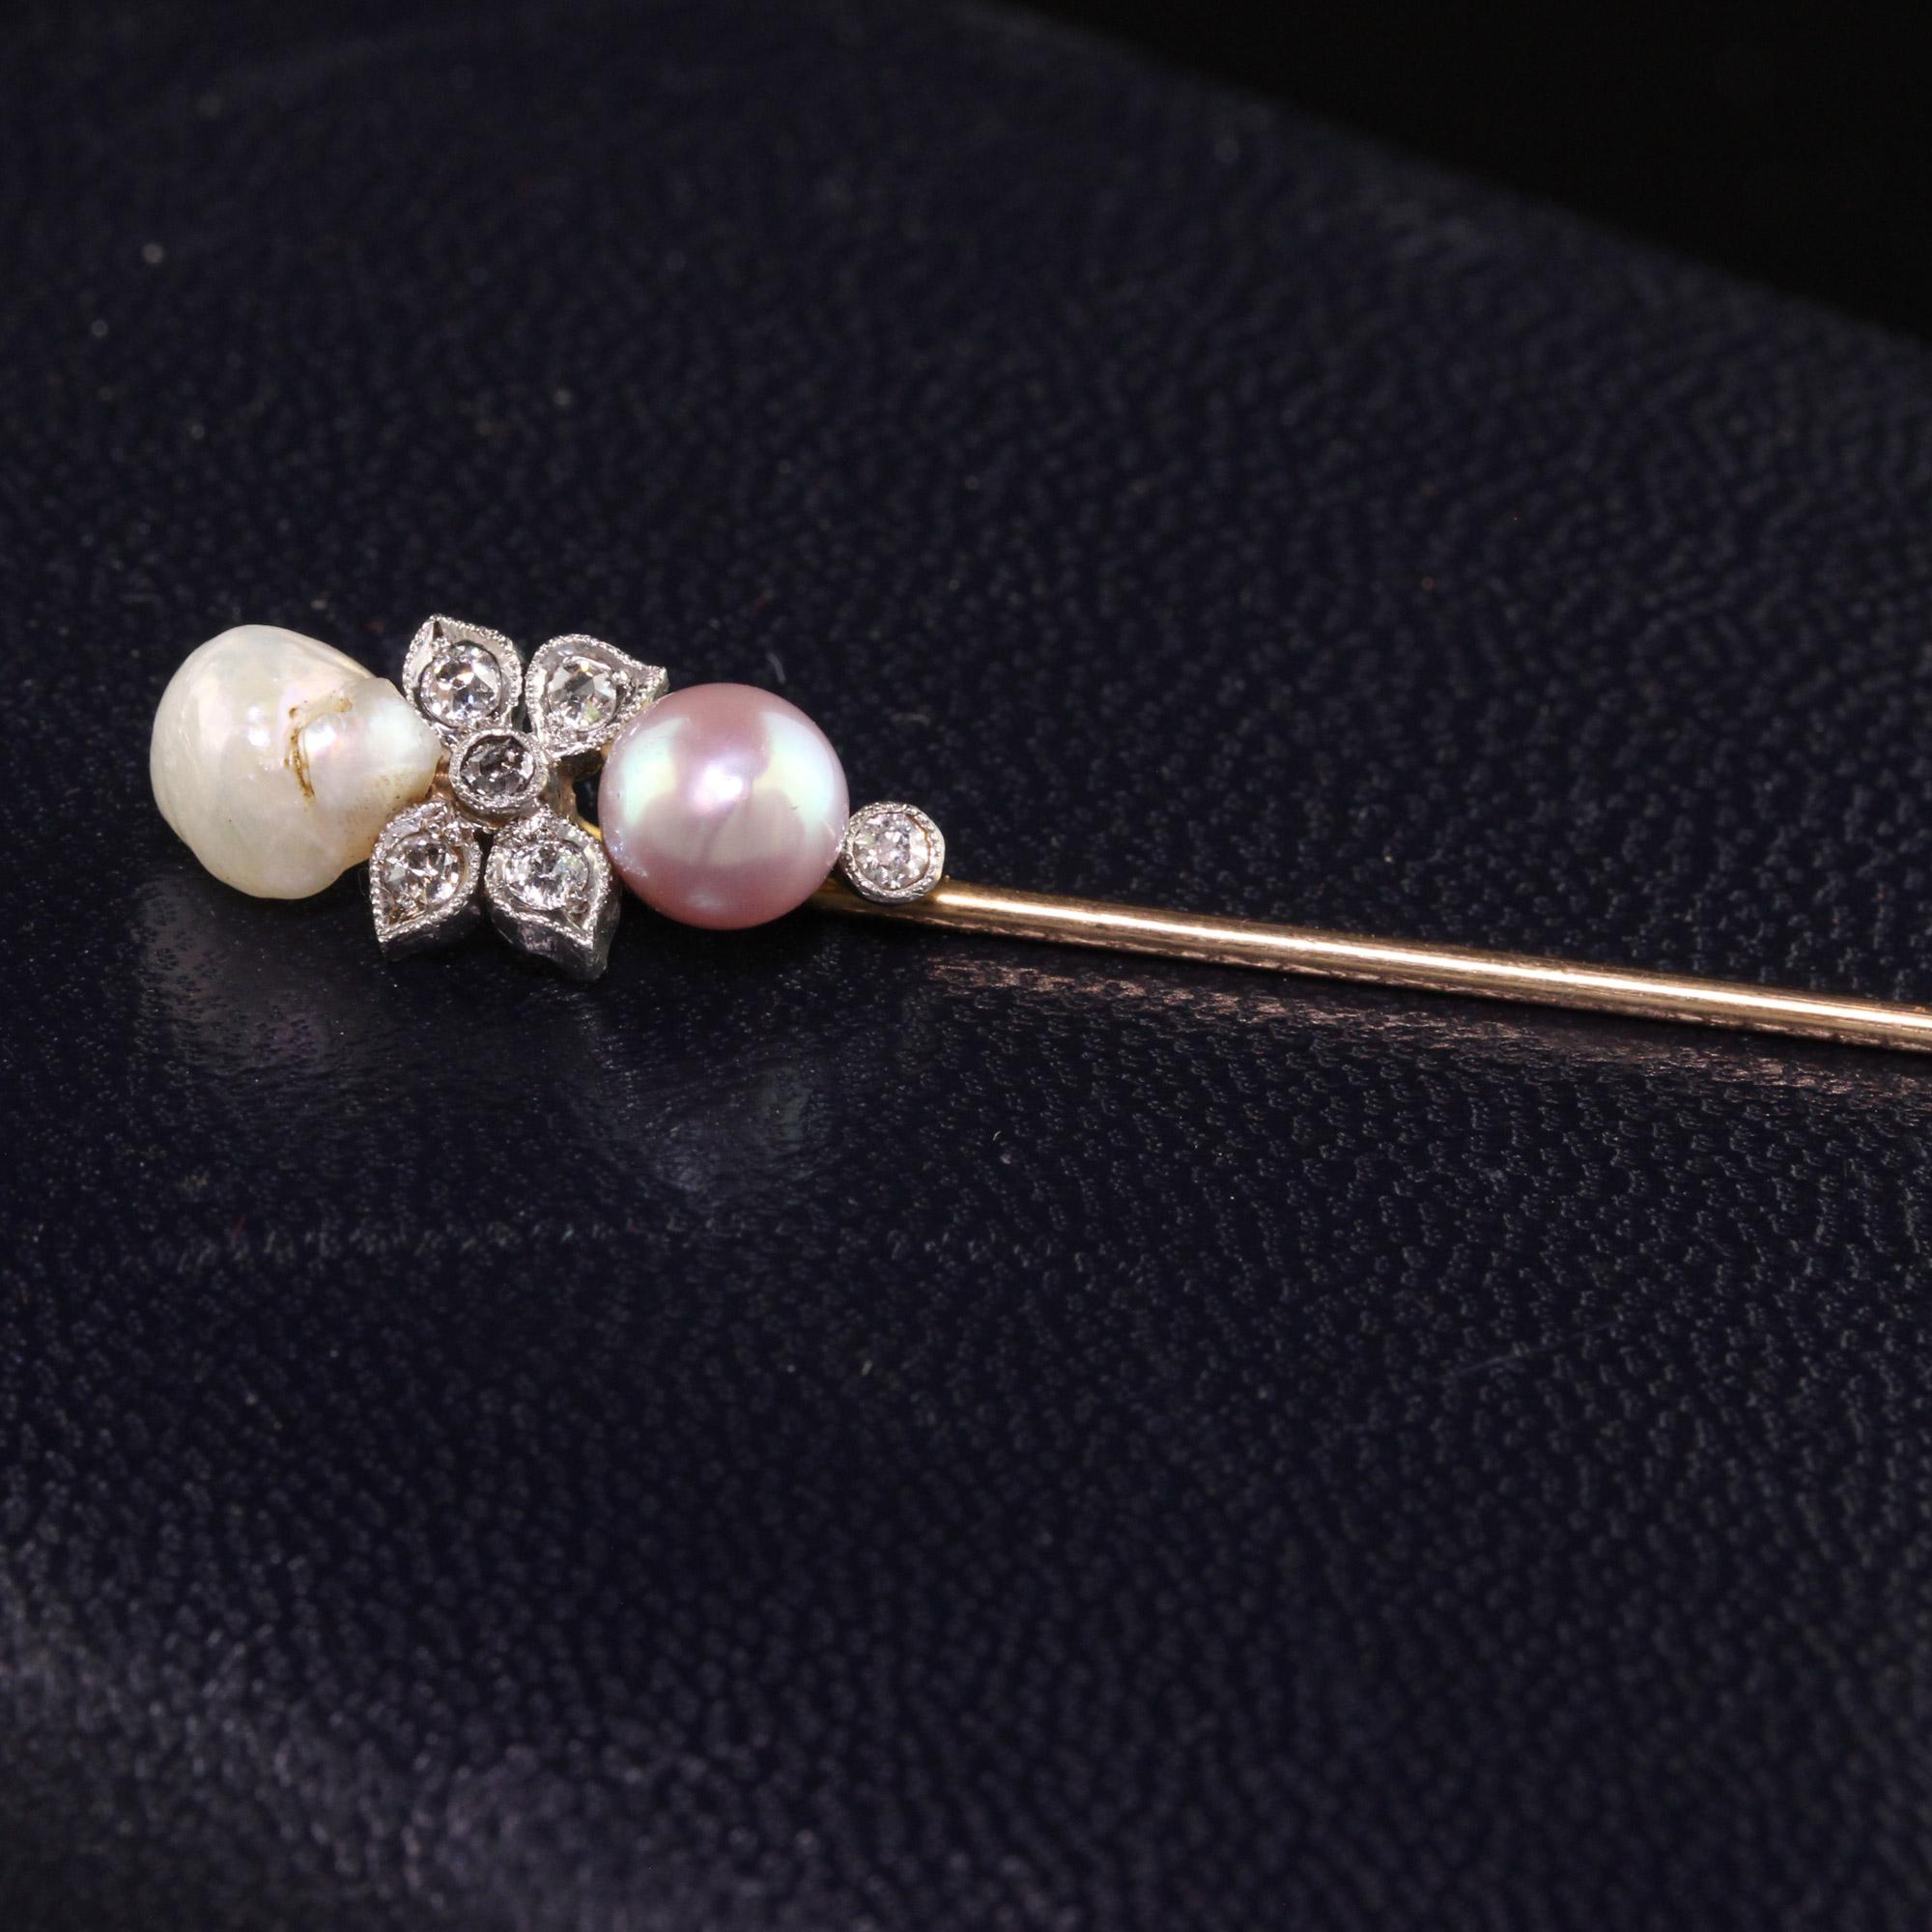 Women's or Men's Antique Edwardian 14K Yellow Gold and Platinum Natural Pearl Diamond Stick Pin For Sale